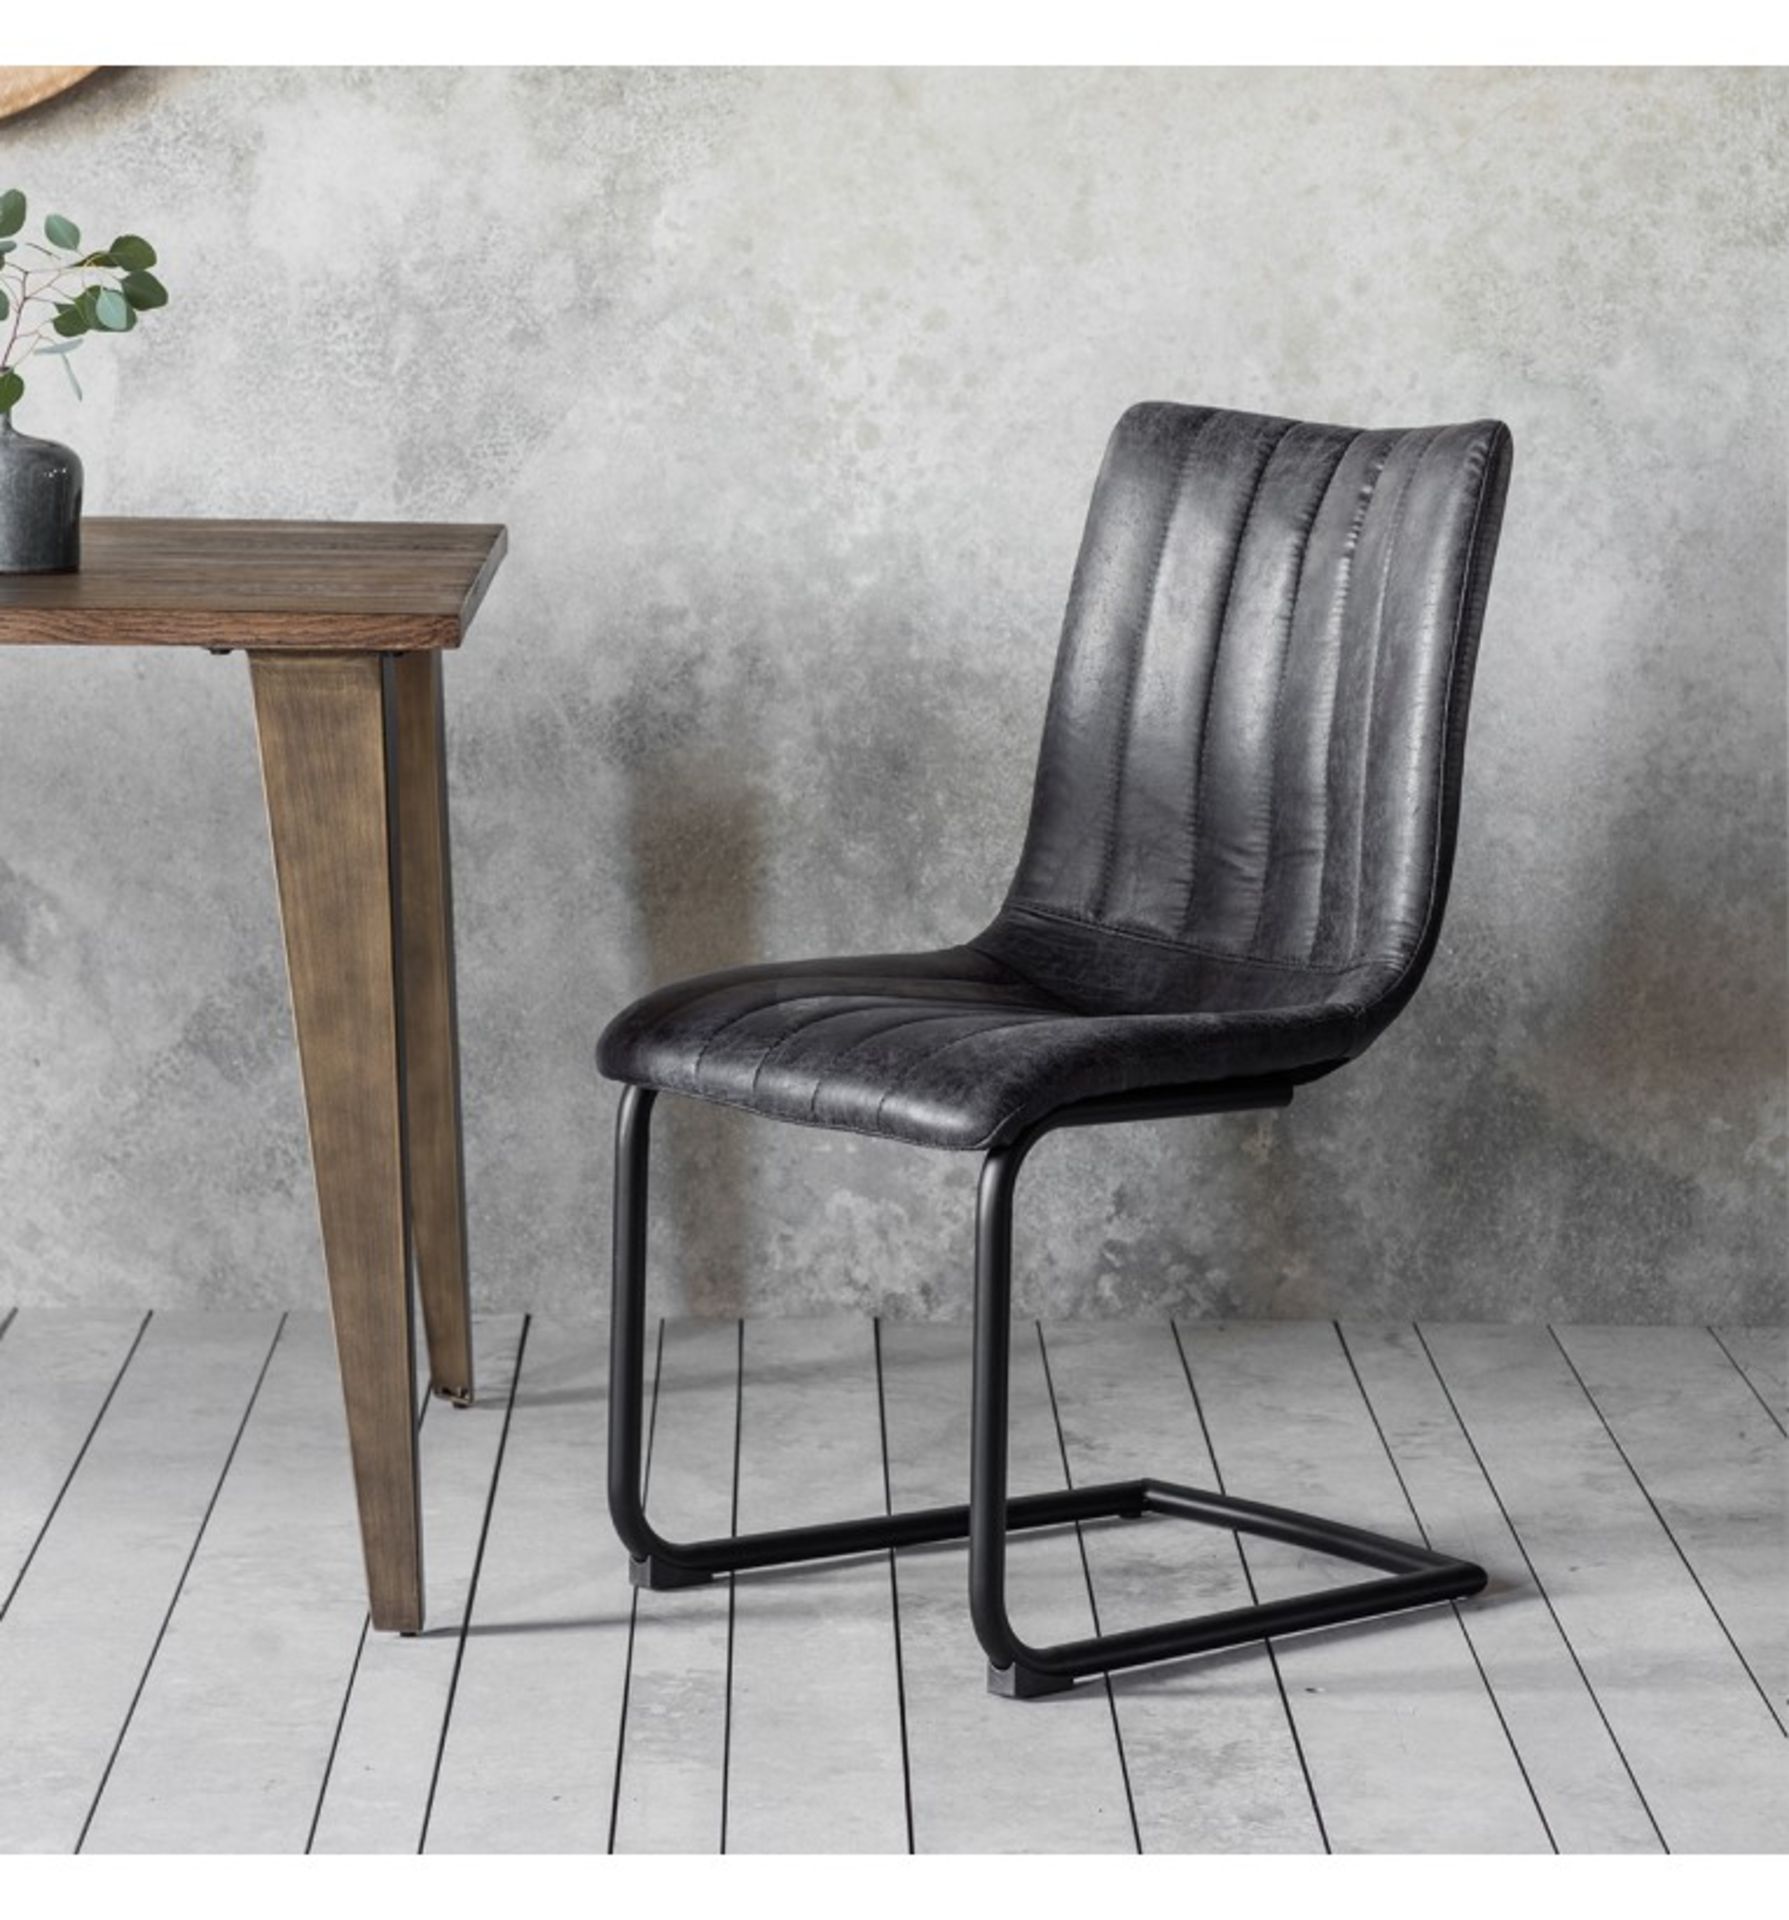 Edington Brown Chair (2pk) A retro classic styled dining chair with decorative stitching detail - Image 2 of 2